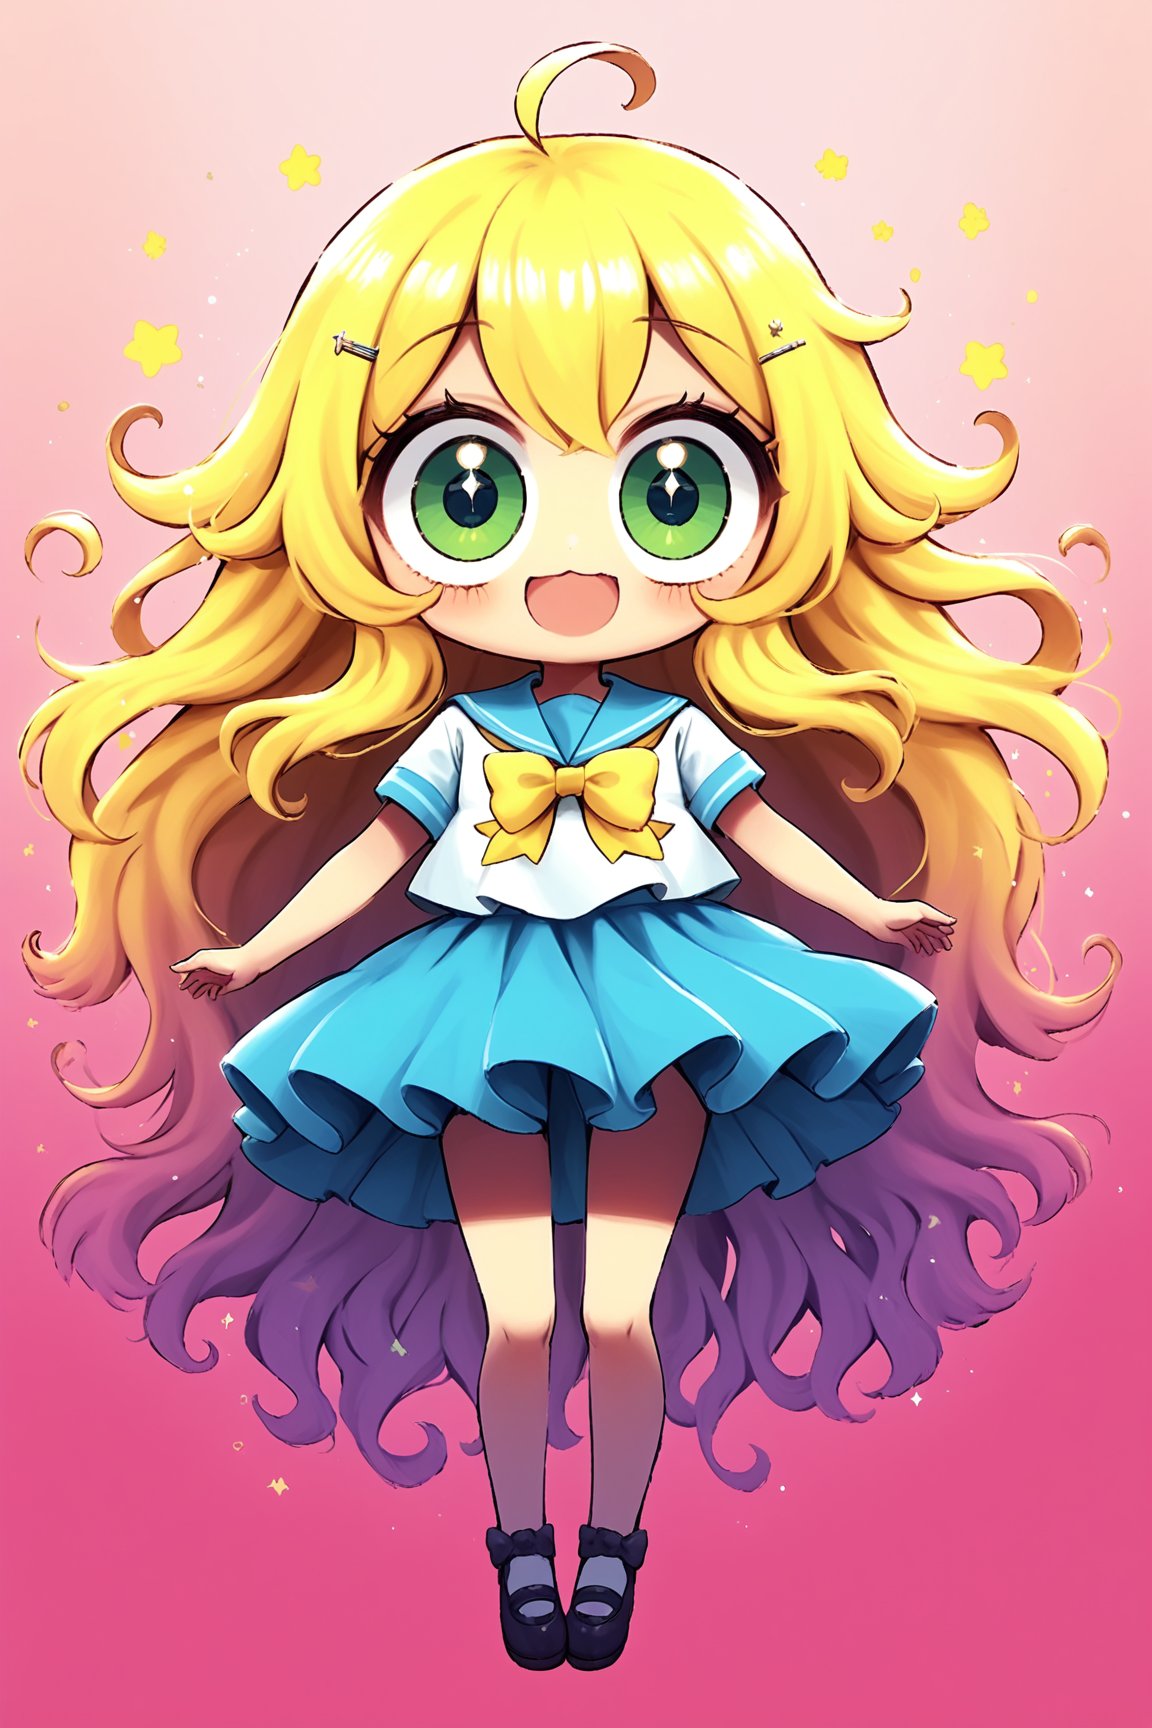 syoujyo manga illustration,solo,featuring an extremely deformed,1Girl, glamorous girl in a sailor uniform,((The girl has exaggerated large eyes:1.5)), sparkling with excitement and an over-the-top, cheerful expression. Her sailor uniform is brightly colored with bold, contrasting hues and glittering accents. She has voluminous flowing hair, adorned with cute accessories like bows and stars.,gloriaexe,txznf,aestheticfi, ,Mangamast3r